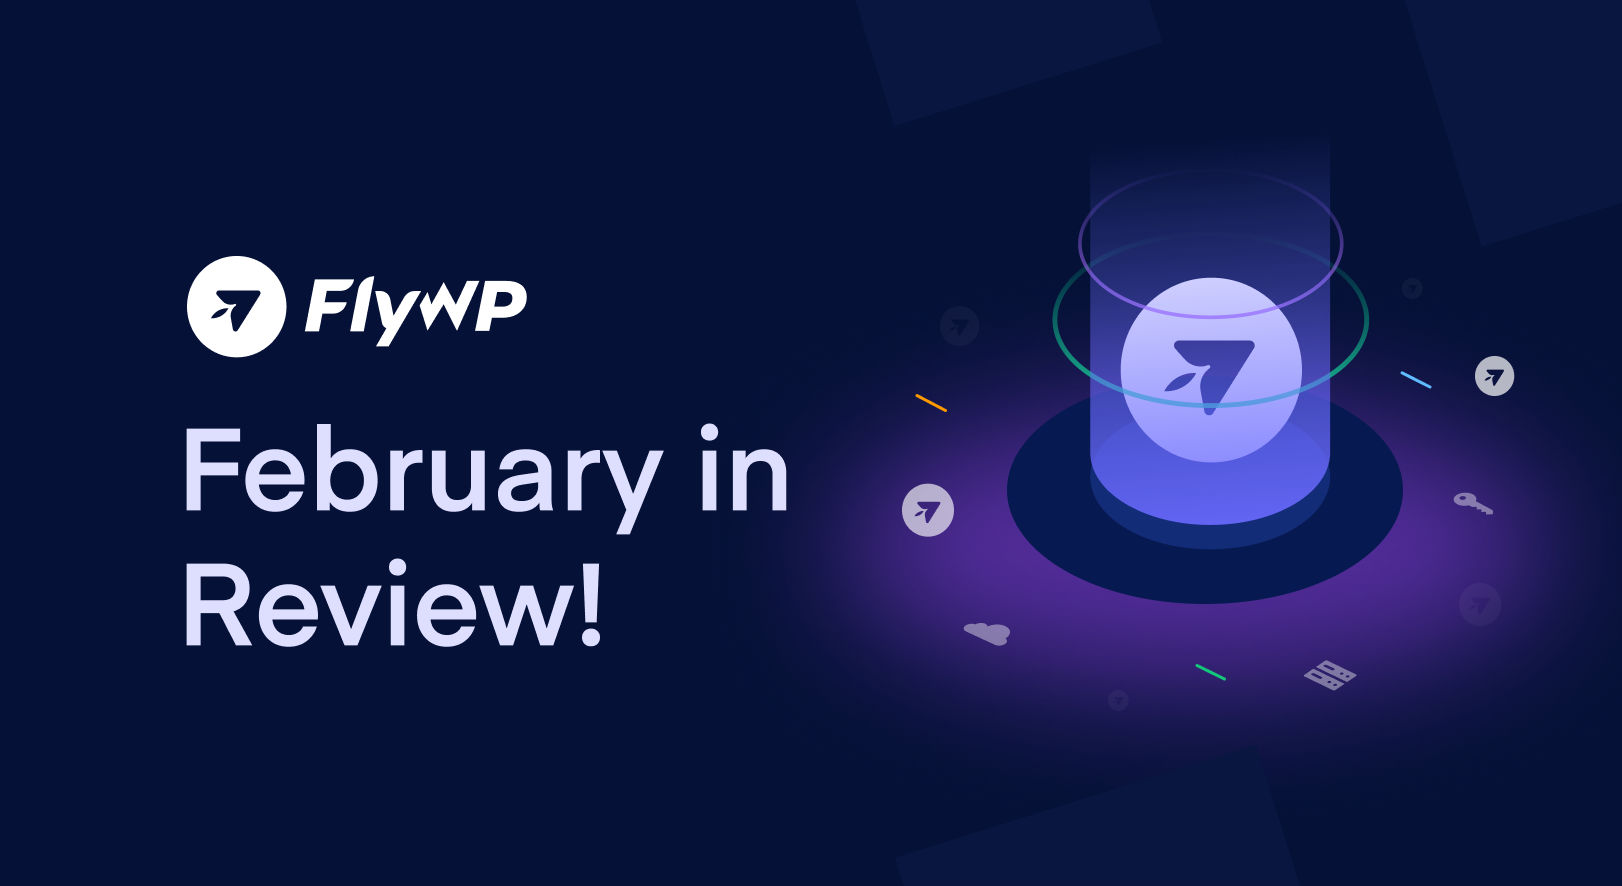 Flywp February In Review!